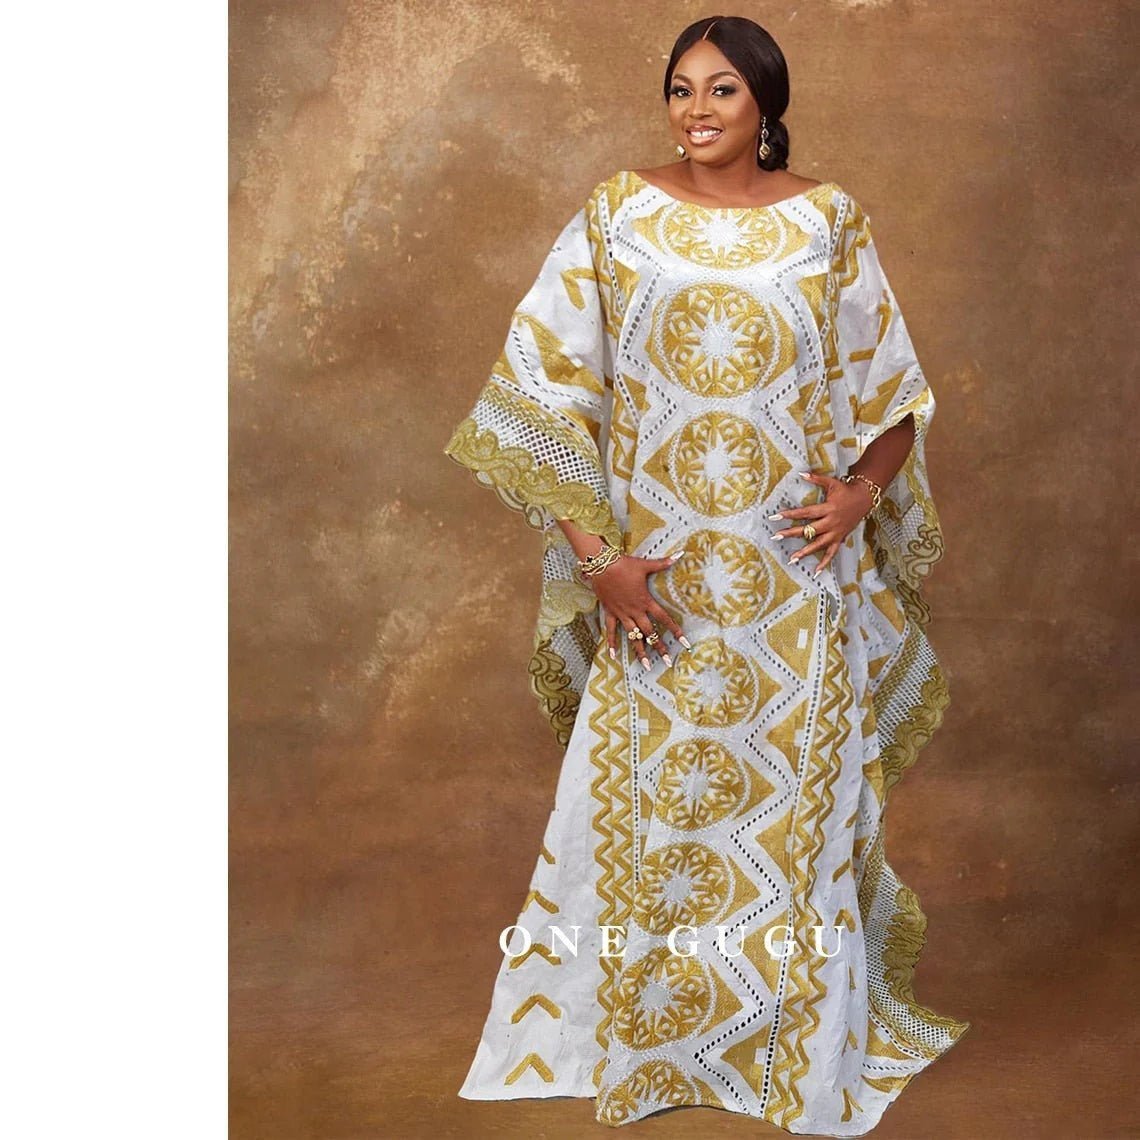 Radiate Elegance in our Nigerian Bazin Dress - Gold Brocade Embroidery and White Robe Design Perfect for Weddings & Parties - Flexi Africa - Free Delivery Worldwide only at www.flexiafrica.com